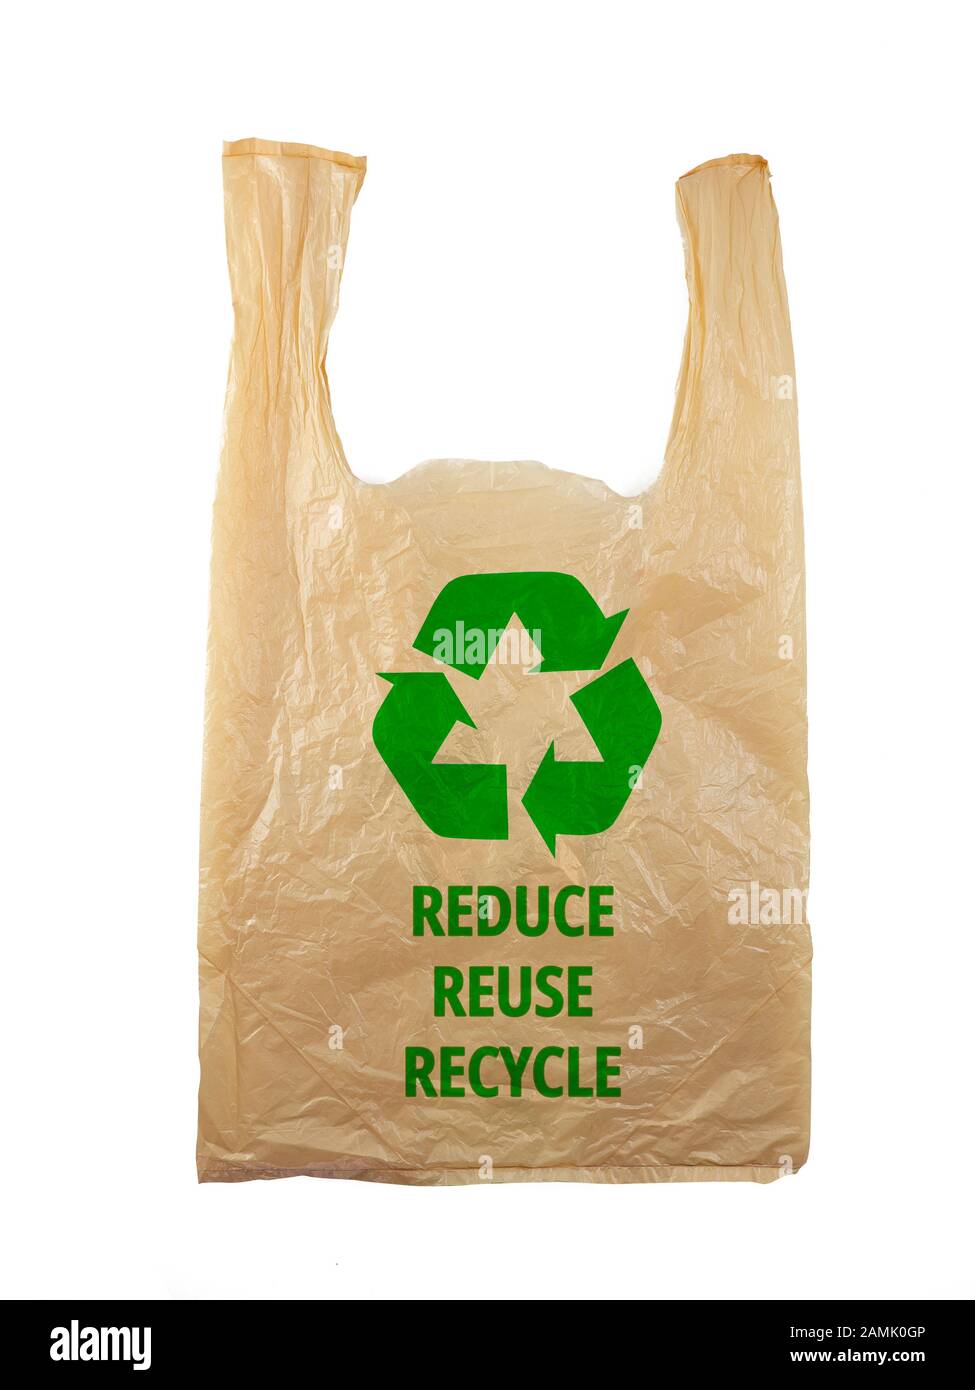 Plastic bag with Recycle sign logo and words REDUCE REUSE RECYCLE